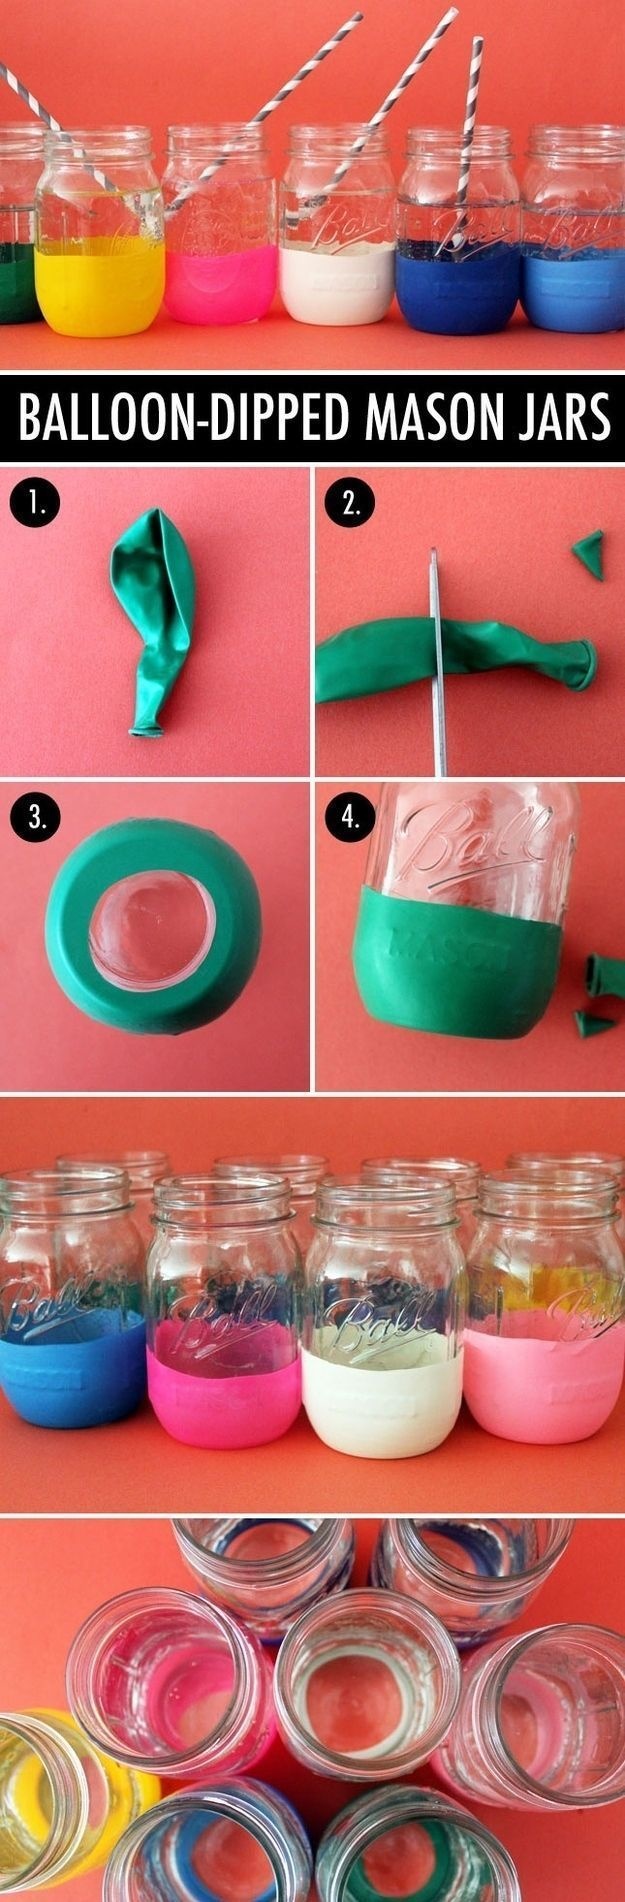 Having a party? Put out balloon-dipped mason jars.